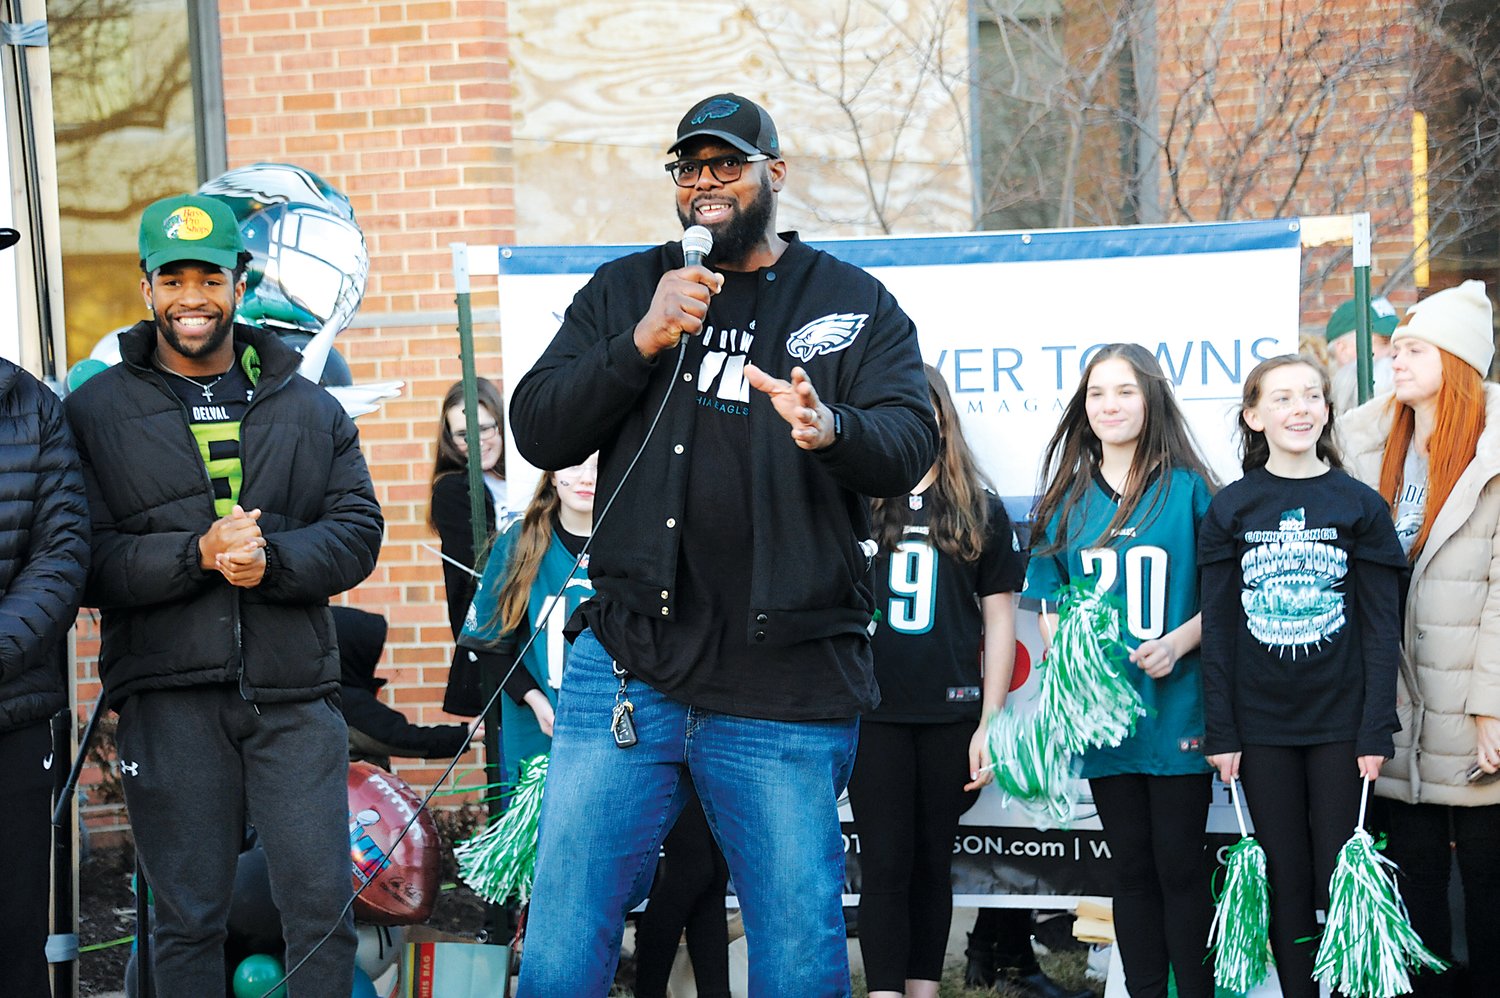 Former Eagles Pro Bowl offensive tackle Tra Thomas, who played 11 seasons and made three Pro Bowls in Philadelphia, fires up the crowd at the Herald’s “Bucks County Loves the Birds” pep rally on the lawn of the old county courthouse in Doylestown Friday evening.